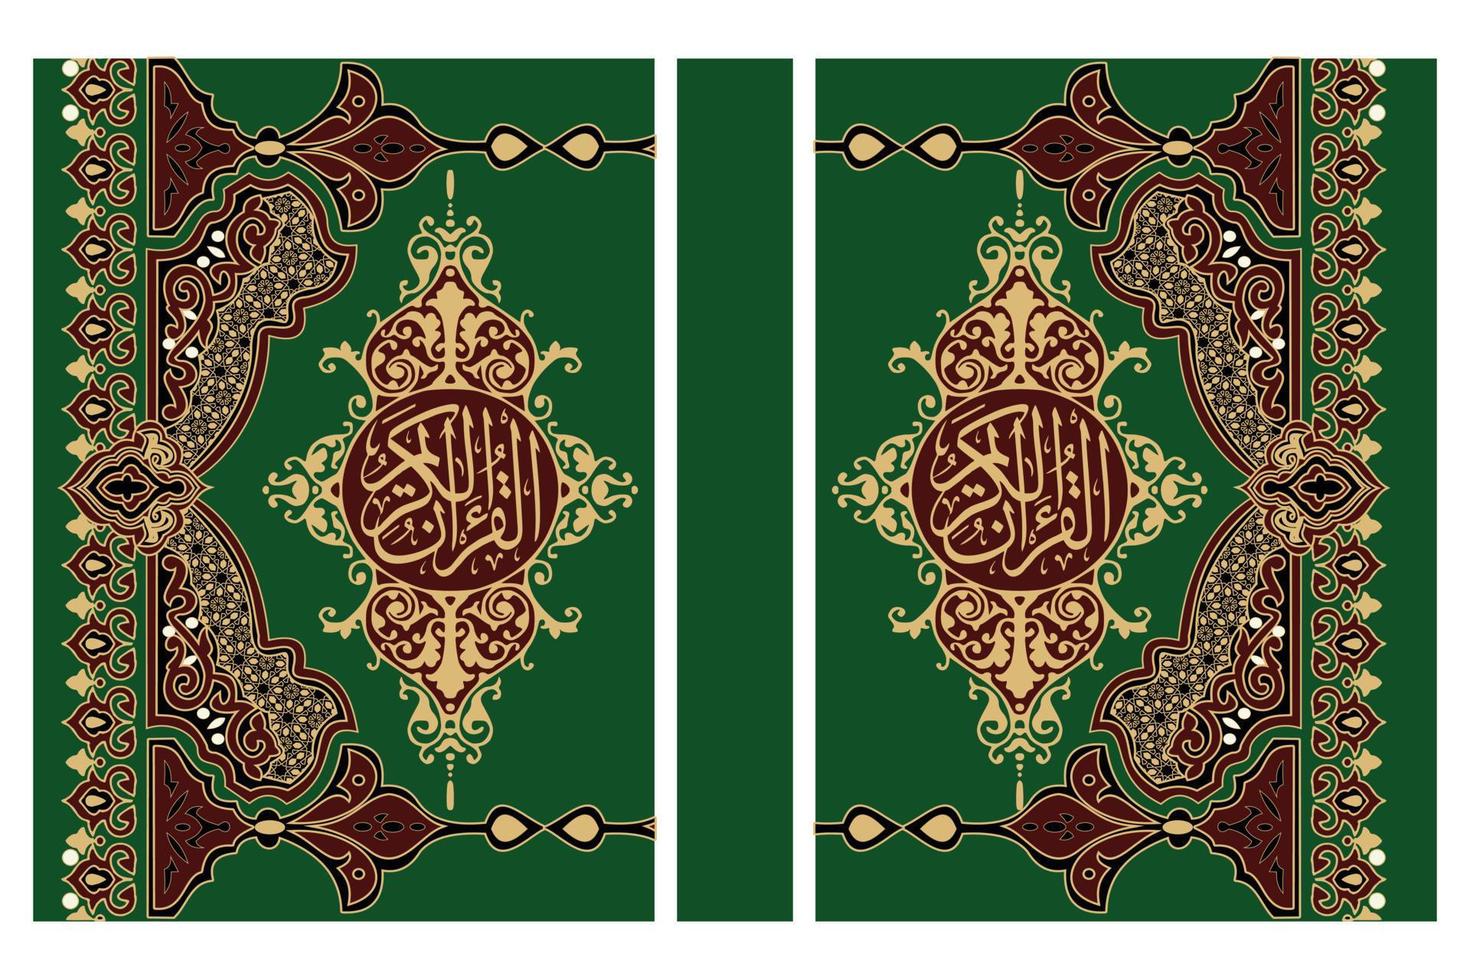 Classic Arabic Book Cover Typography Design is created with beautiful Islamic ornament vector